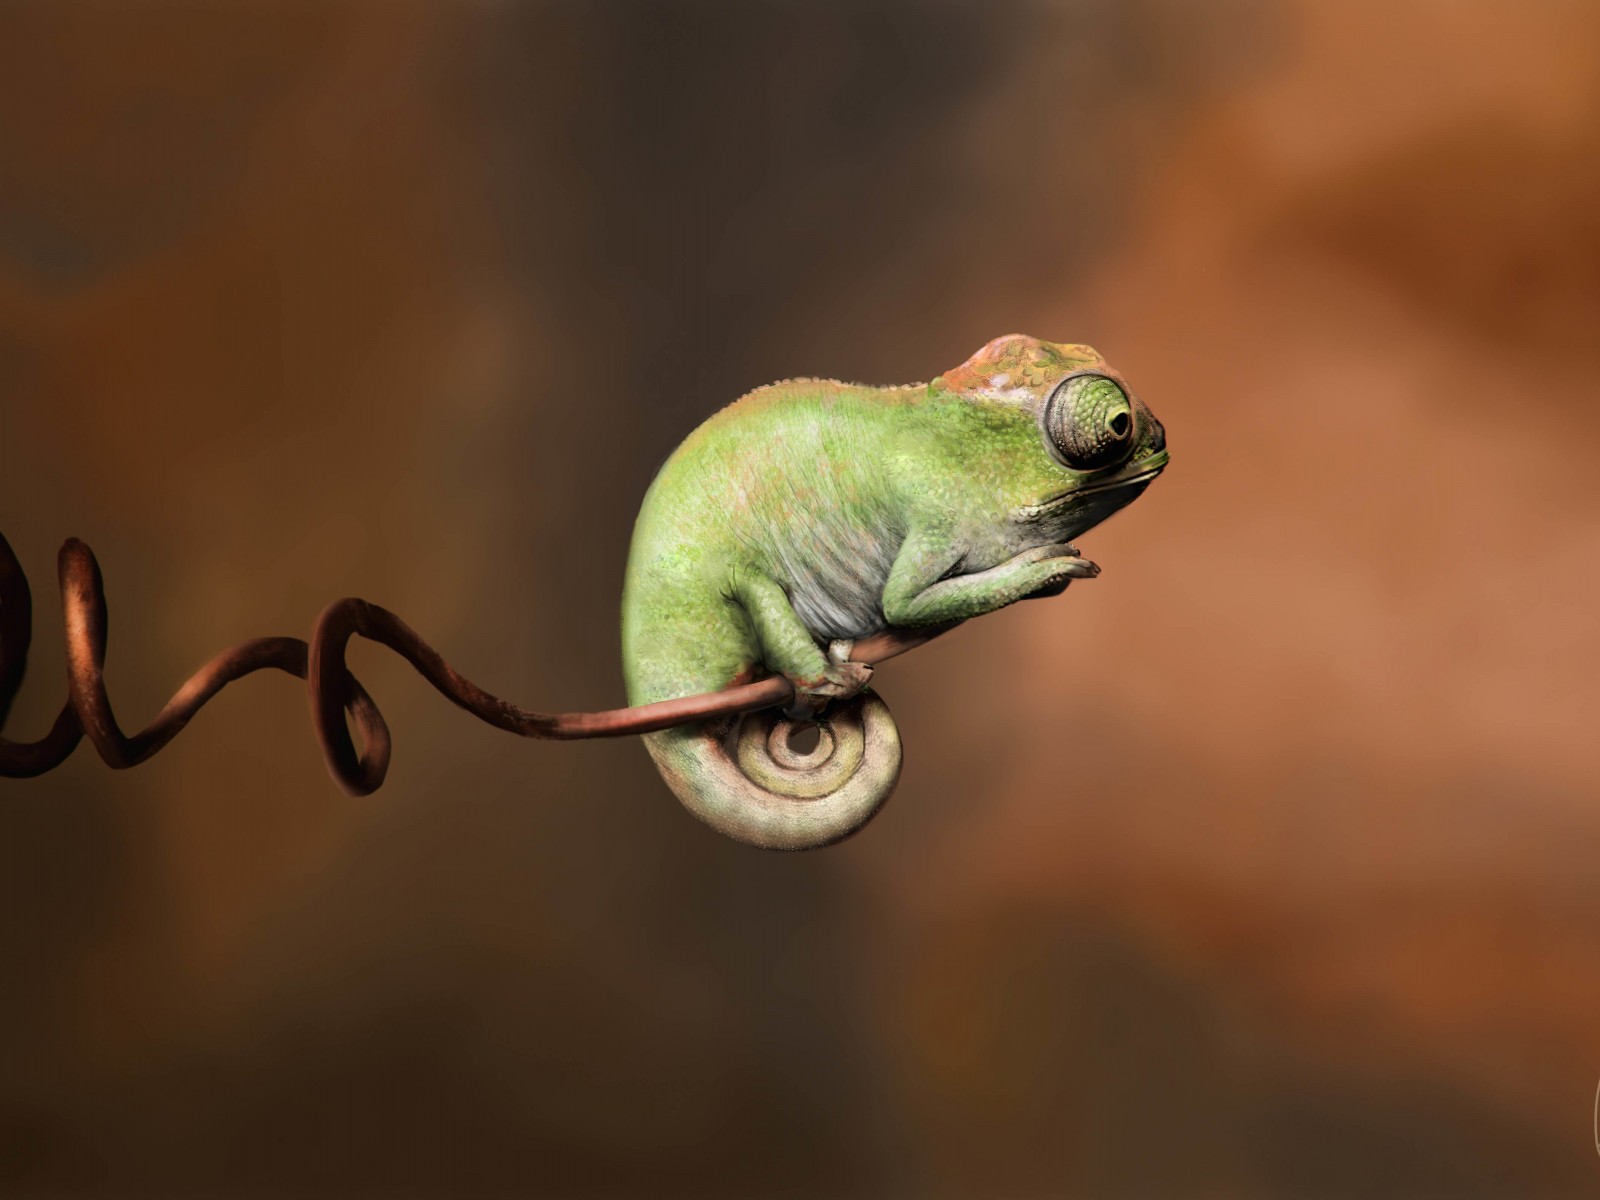 Baby Chameleon Perching On a Twisted Branch Wallpaper for Desktop 1600x1200